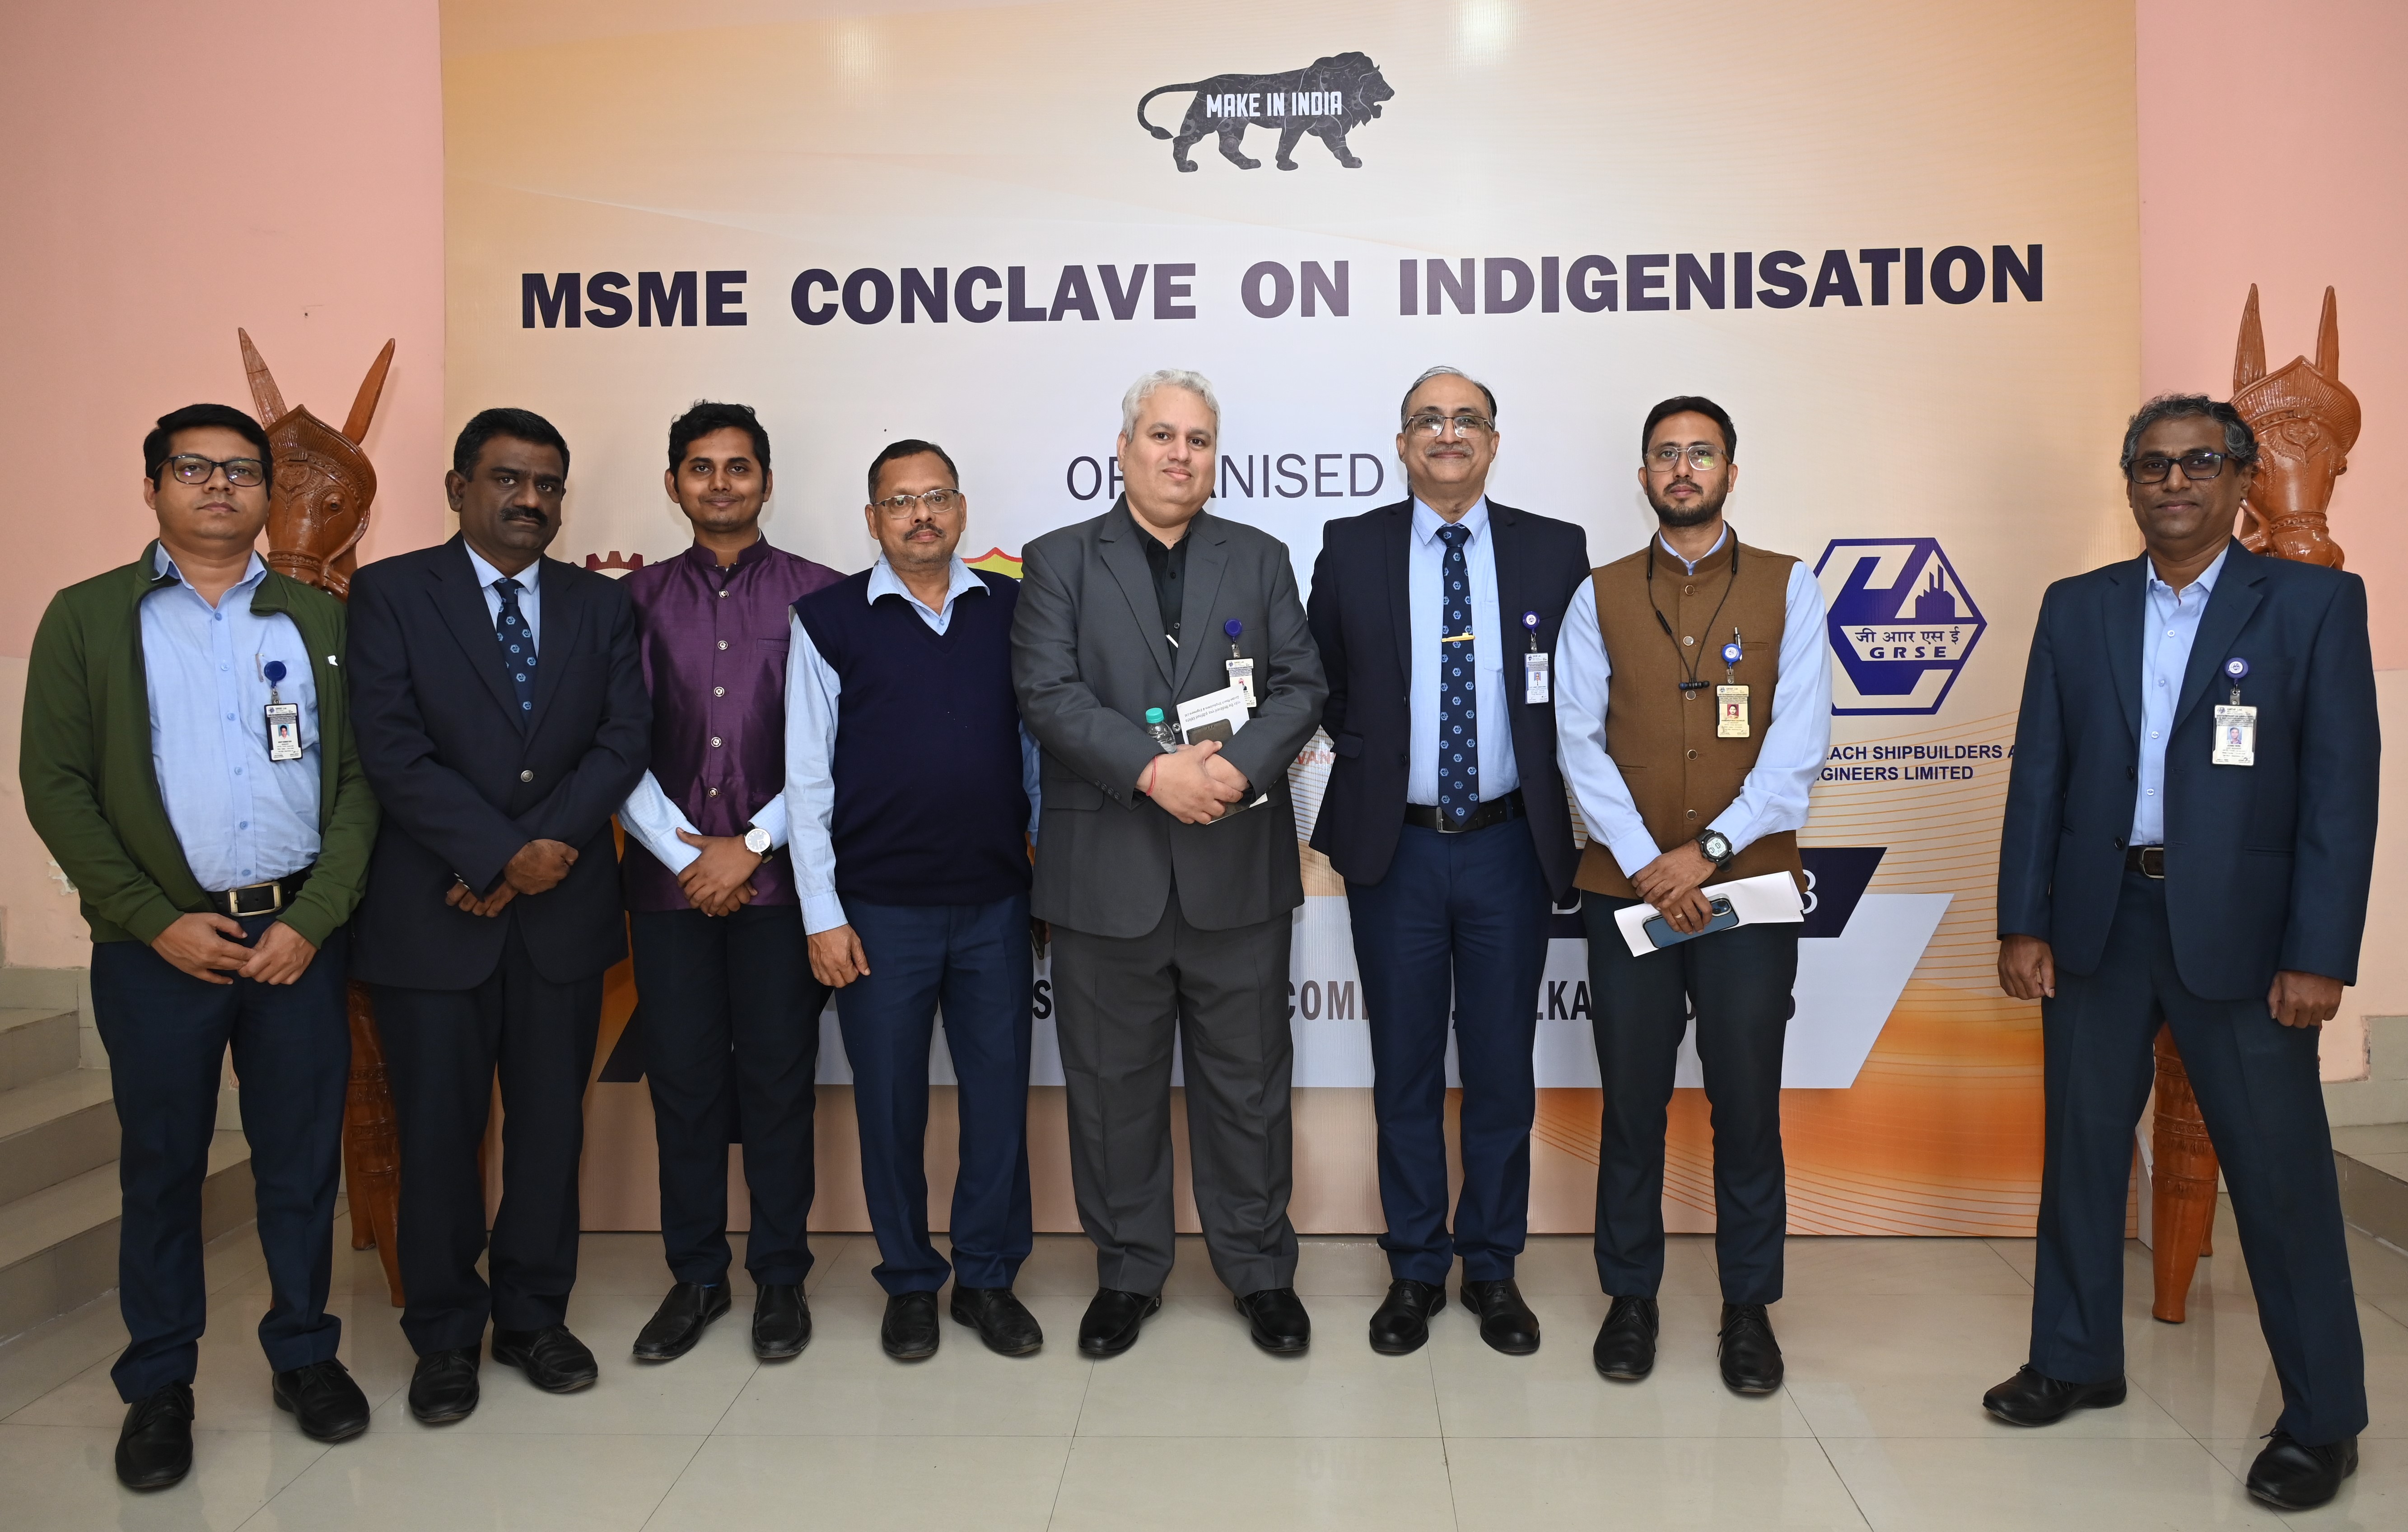 MSME Conclave on Indigenization organised by GRSE in collaboration with AWEIL & YIL at OFB Rajarhat Complex, Kolkata on 15 Dec 23